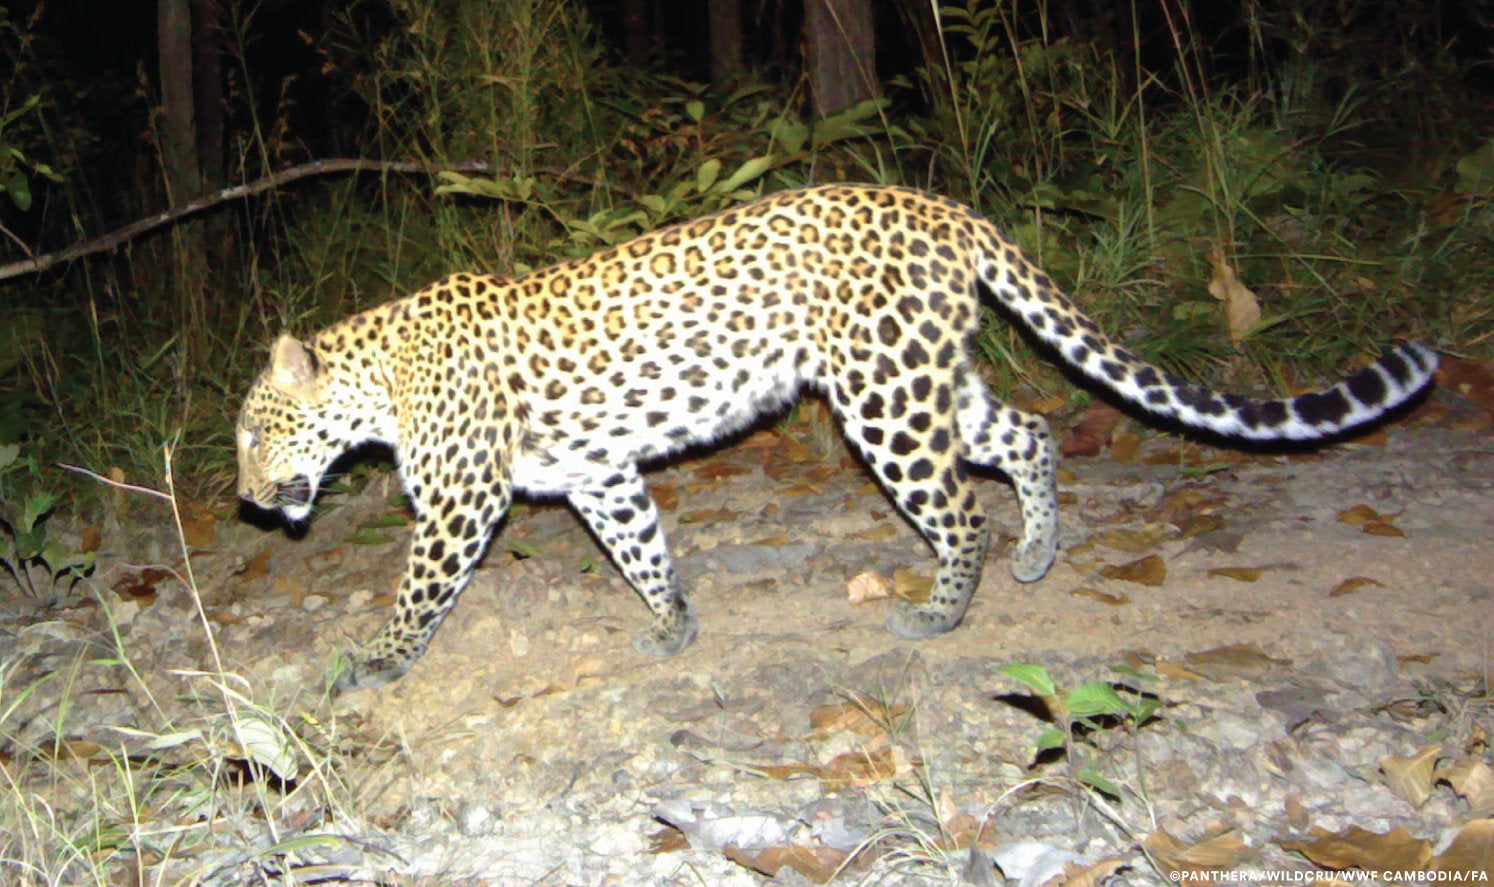 Scientists were also shocked to discover that the primary prey of leopards was banteng - a wild species of cattle weighing up to 800 kilos (1,760 pounds).